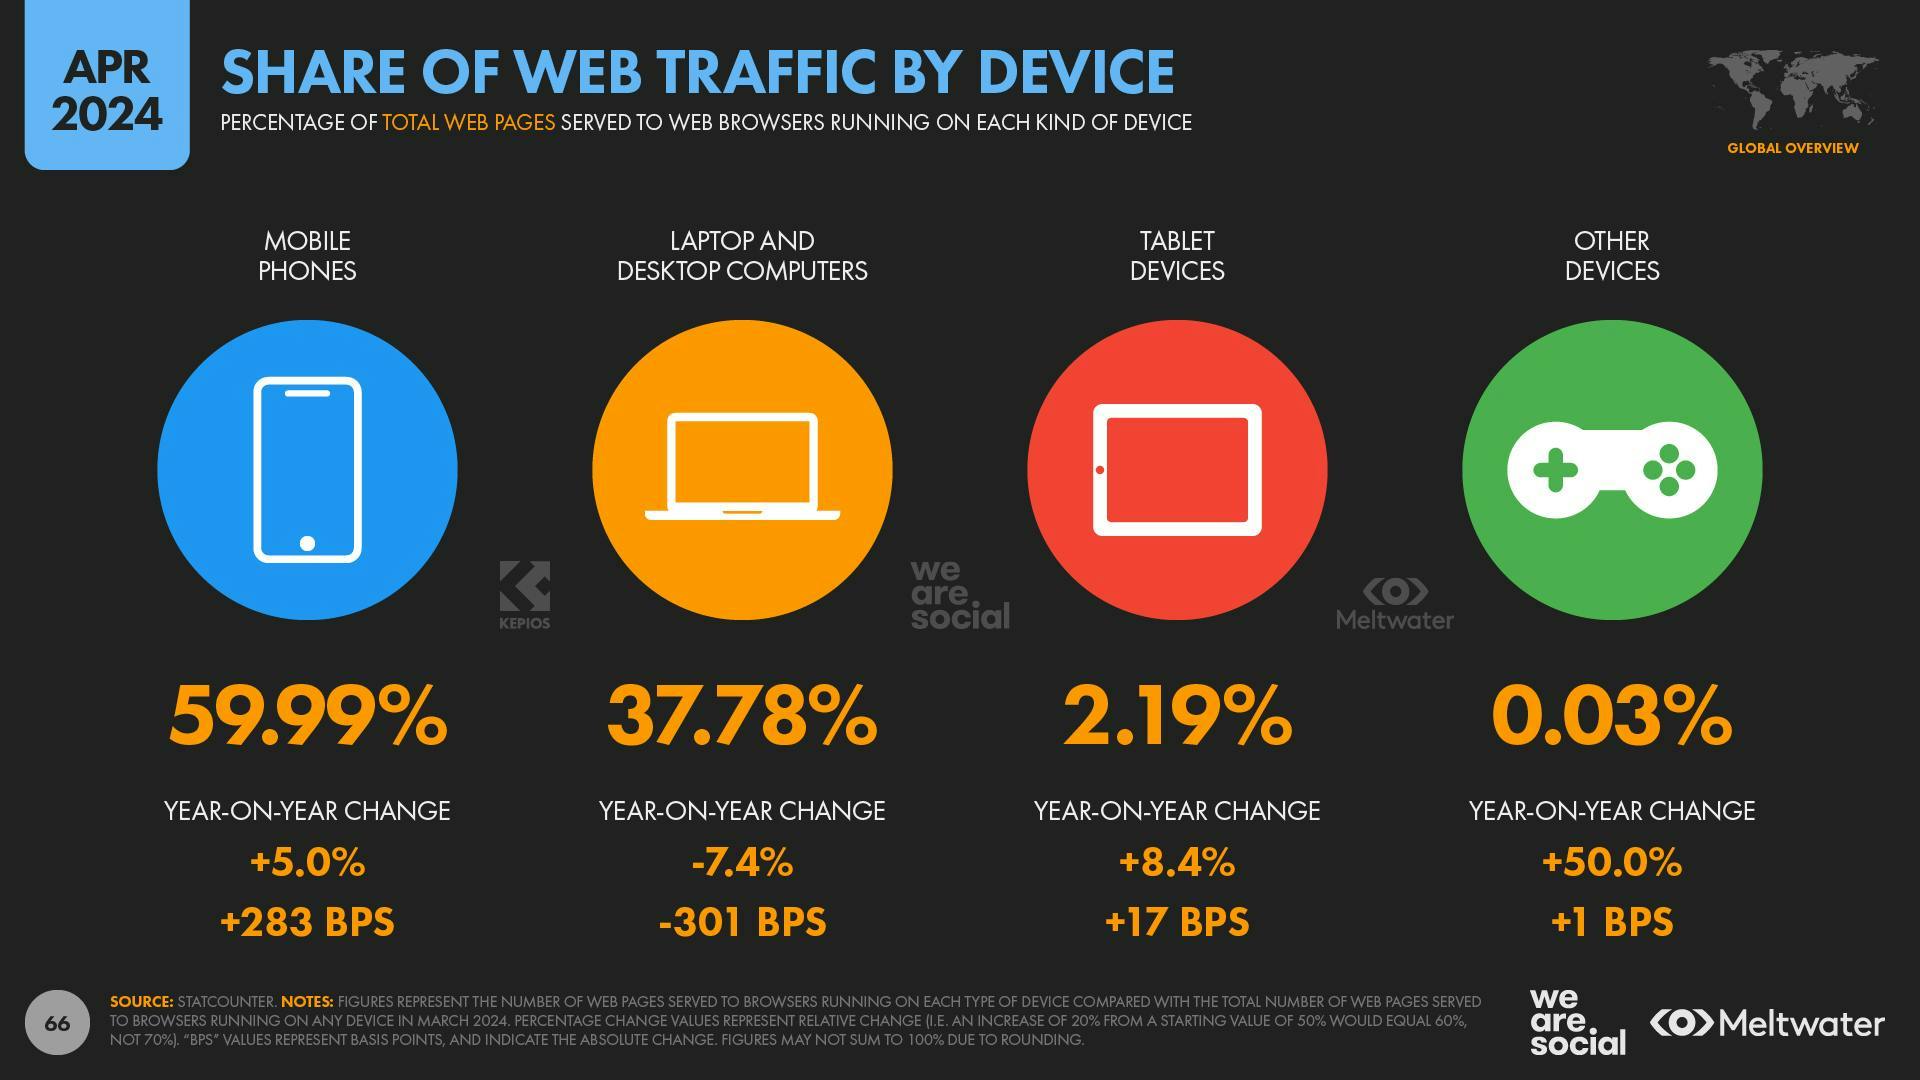 Share of web traffic by device